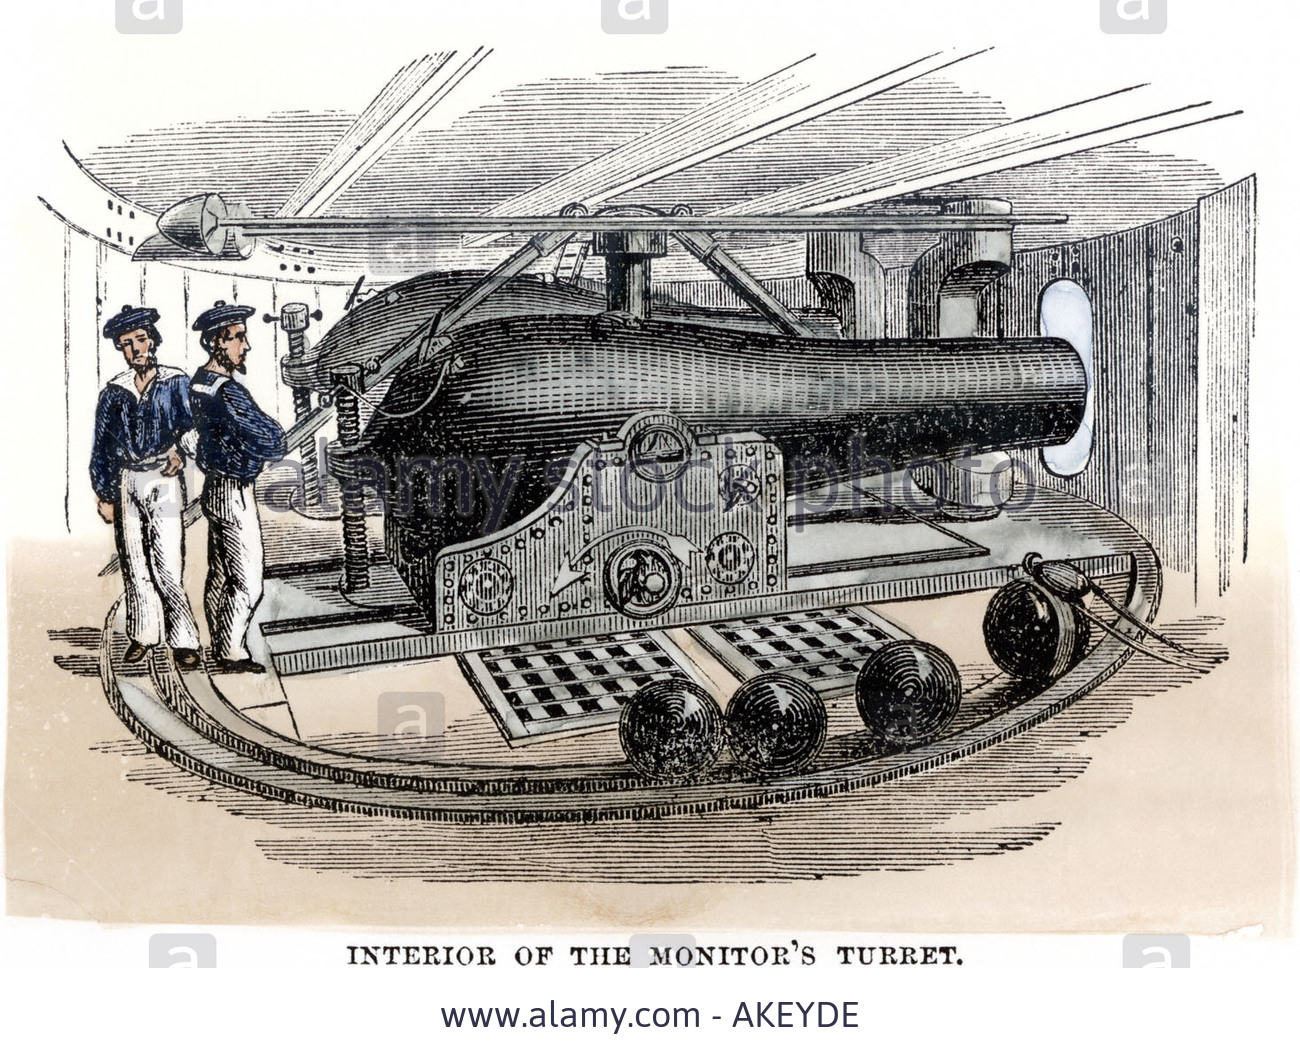 artillery-inside-the-revolving-turret-of-the-ironclad-us-gunboat-monitor-AKEYDE.jpg